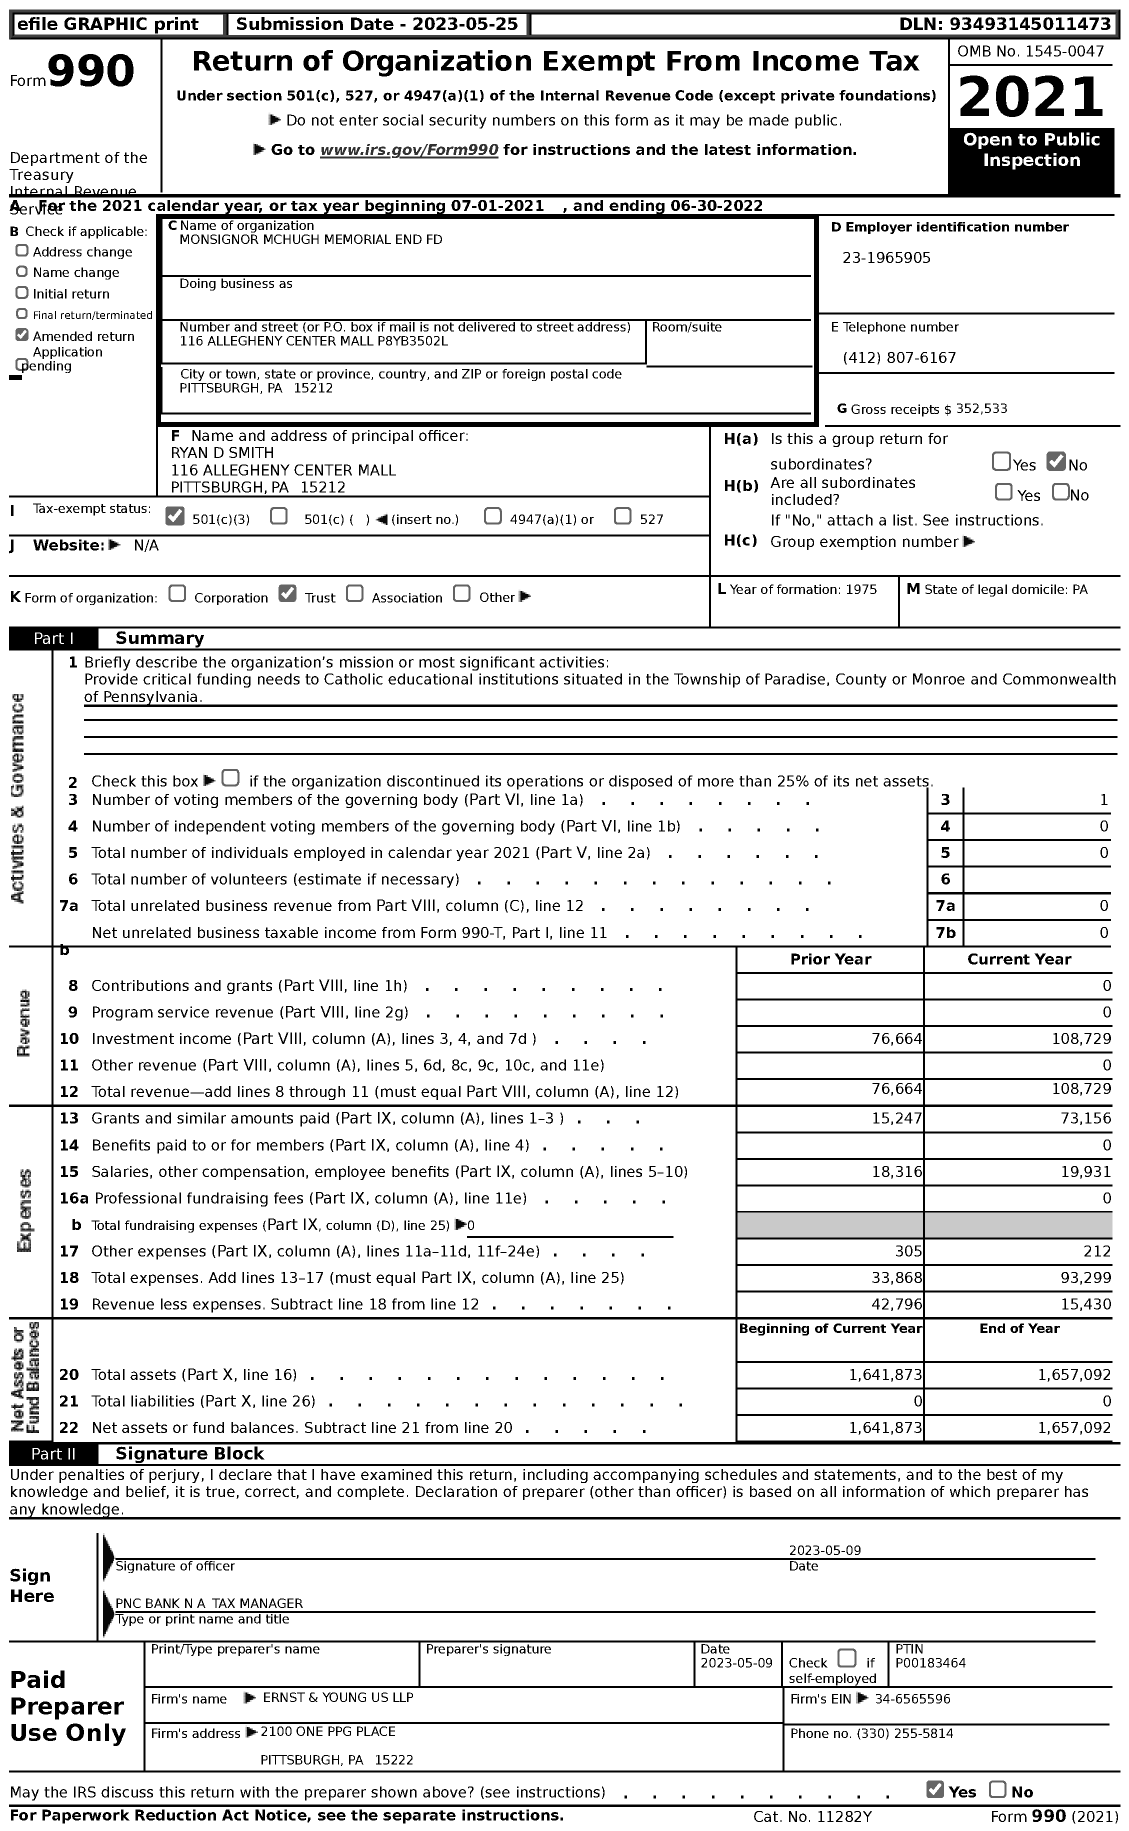 Image of first page of 2021 Form 990 for Monsignor Mchugh Memorial End Fund